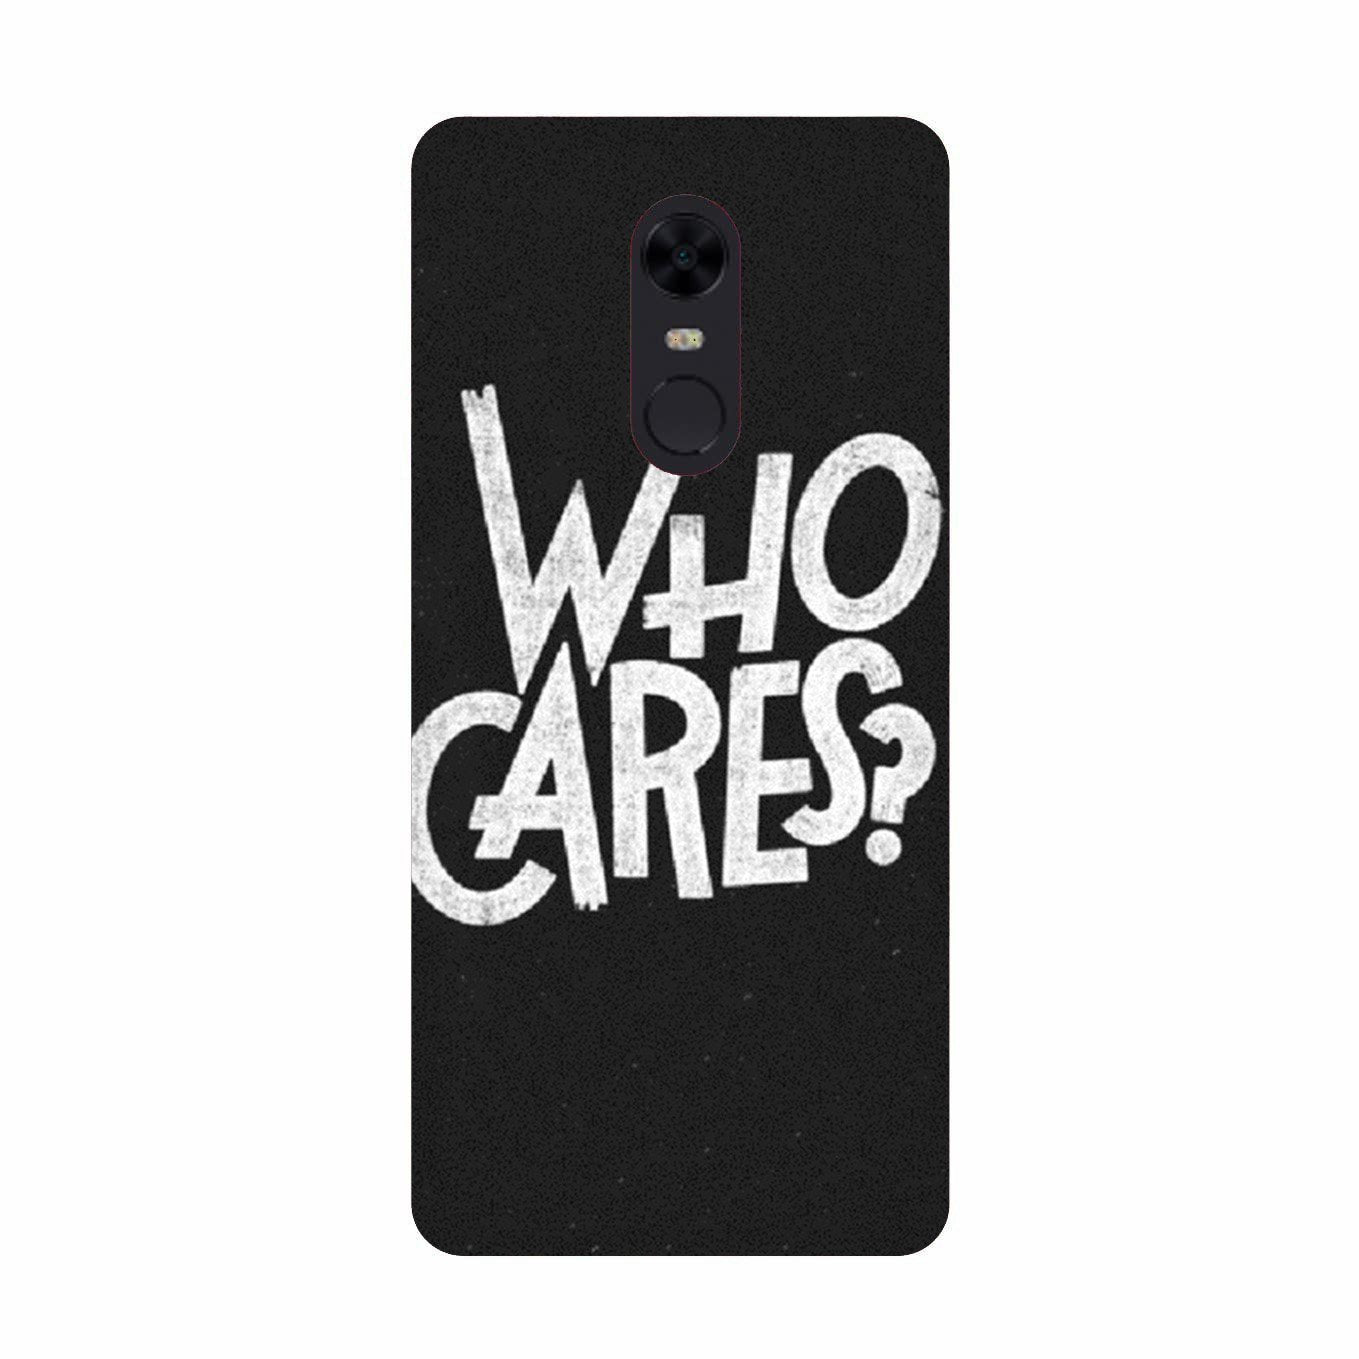 Who Cares Case for Redmi Note 4